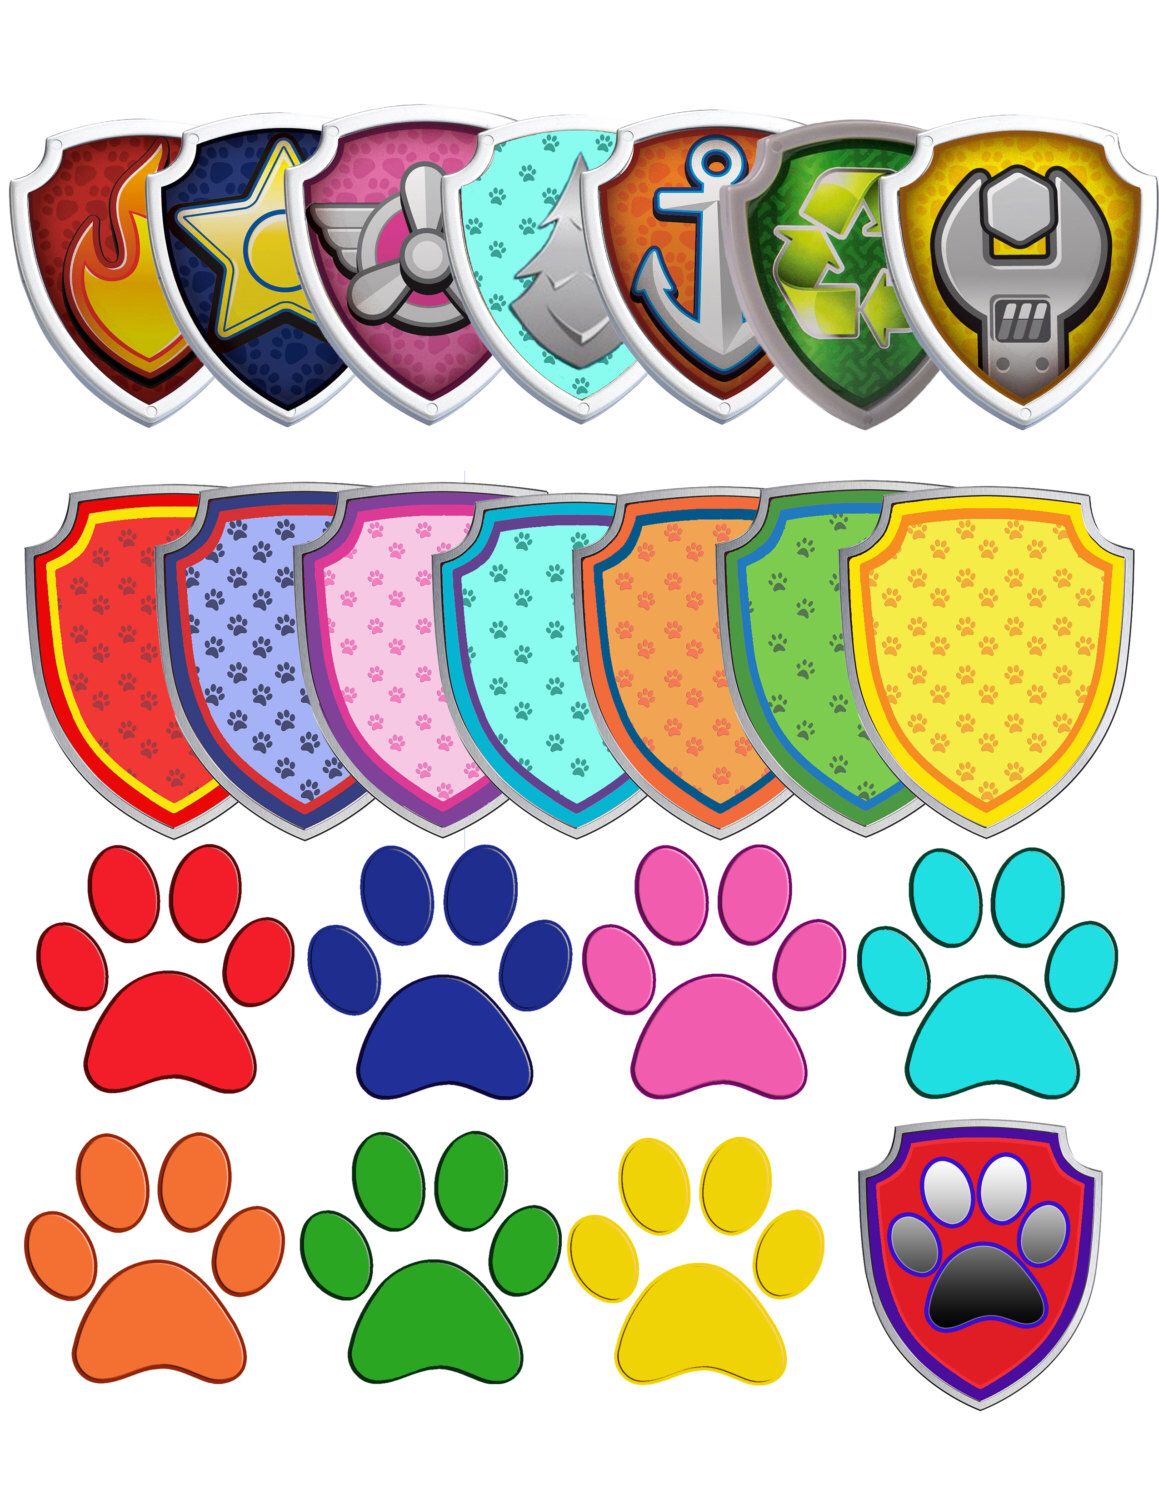 Paw patrol clipart shared by hayden scalsys jpg